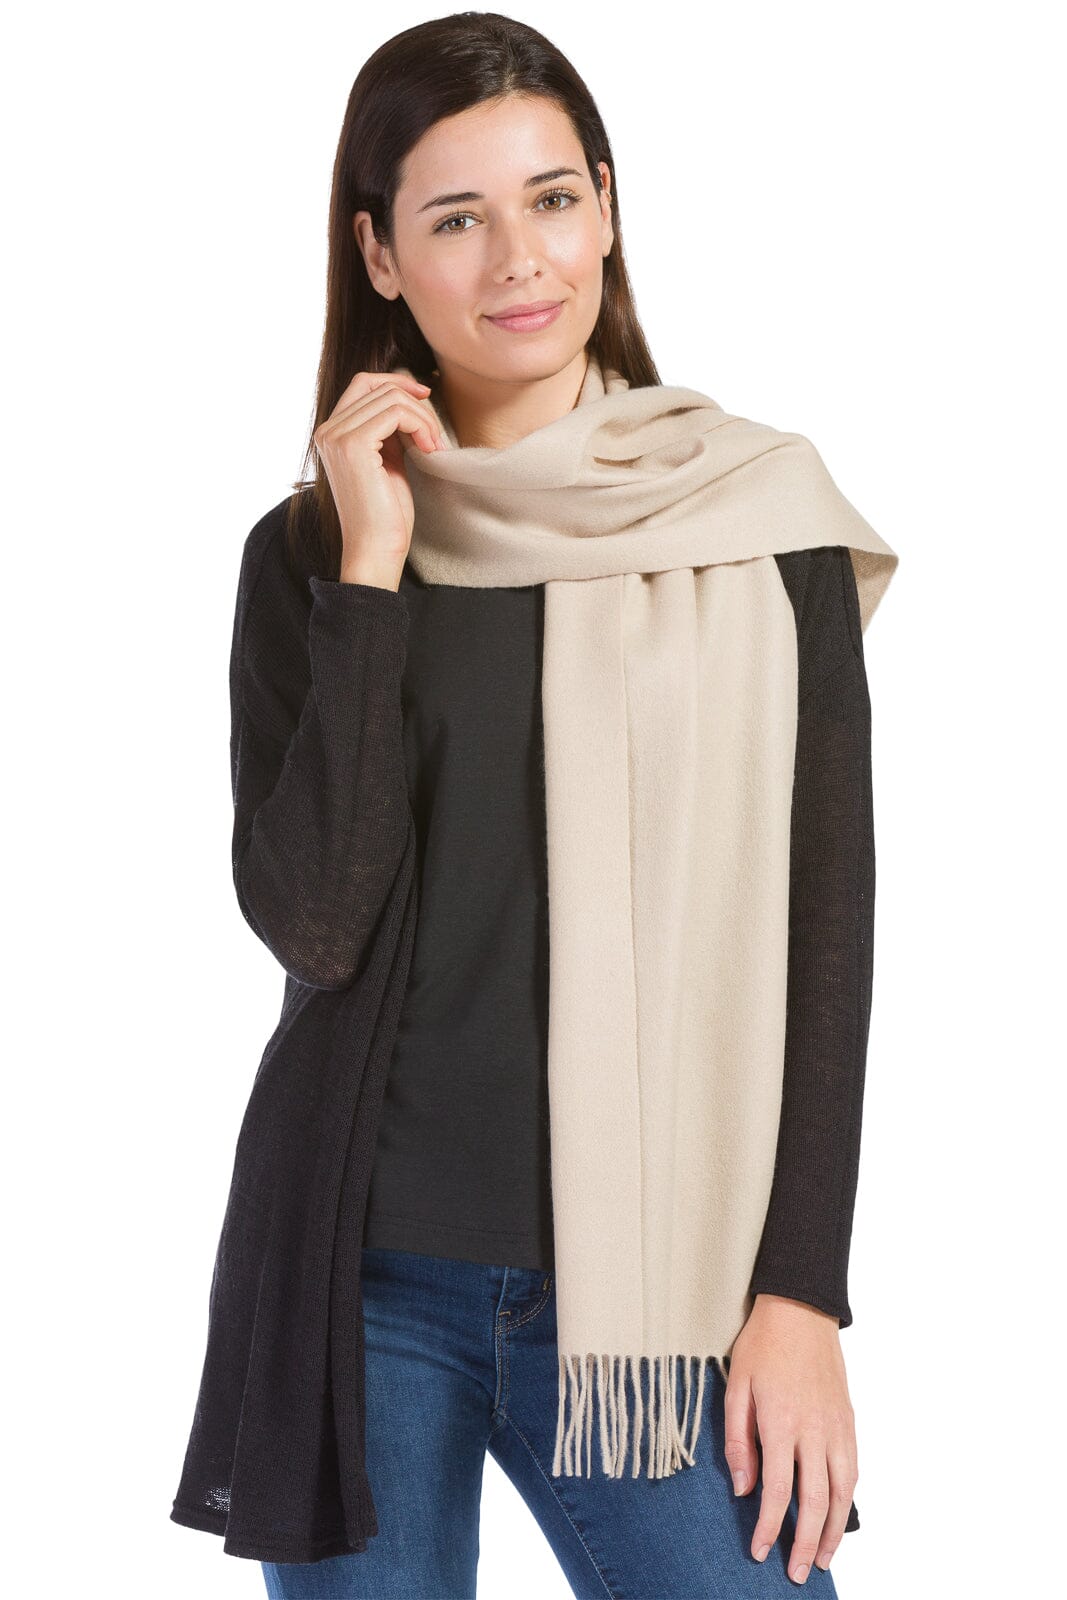 Women's Classic 100% Pure Cashmere Scarf Womens>Accessories>Scarf Fishers Finery Camel One Size 